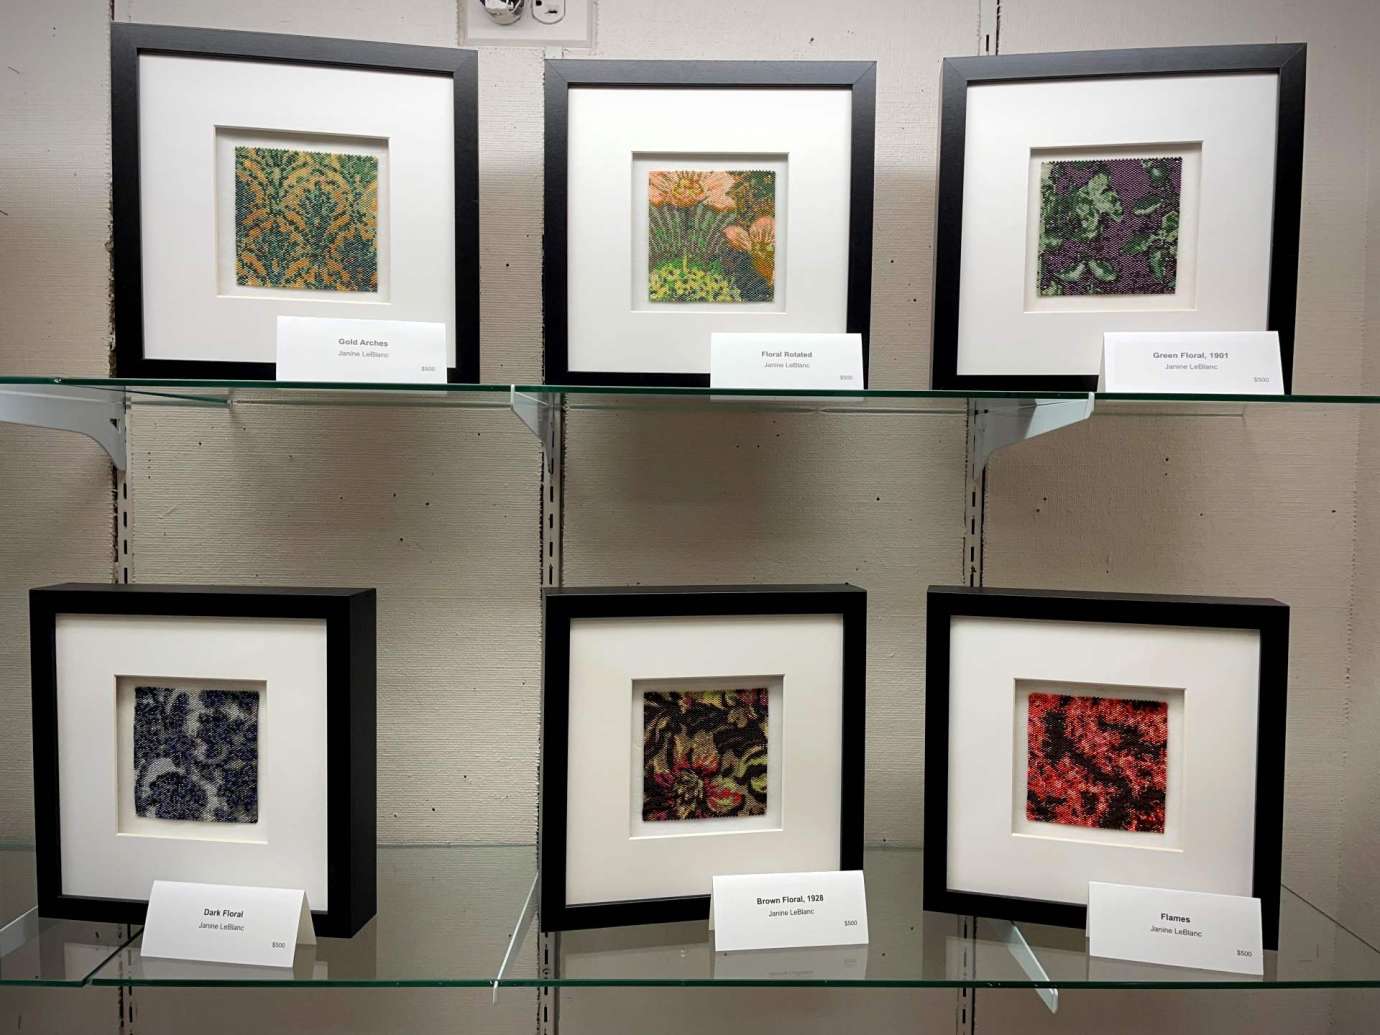 A case with class shelves display Janine LeBlanc's framed beadwork at Sertoma Arts Center